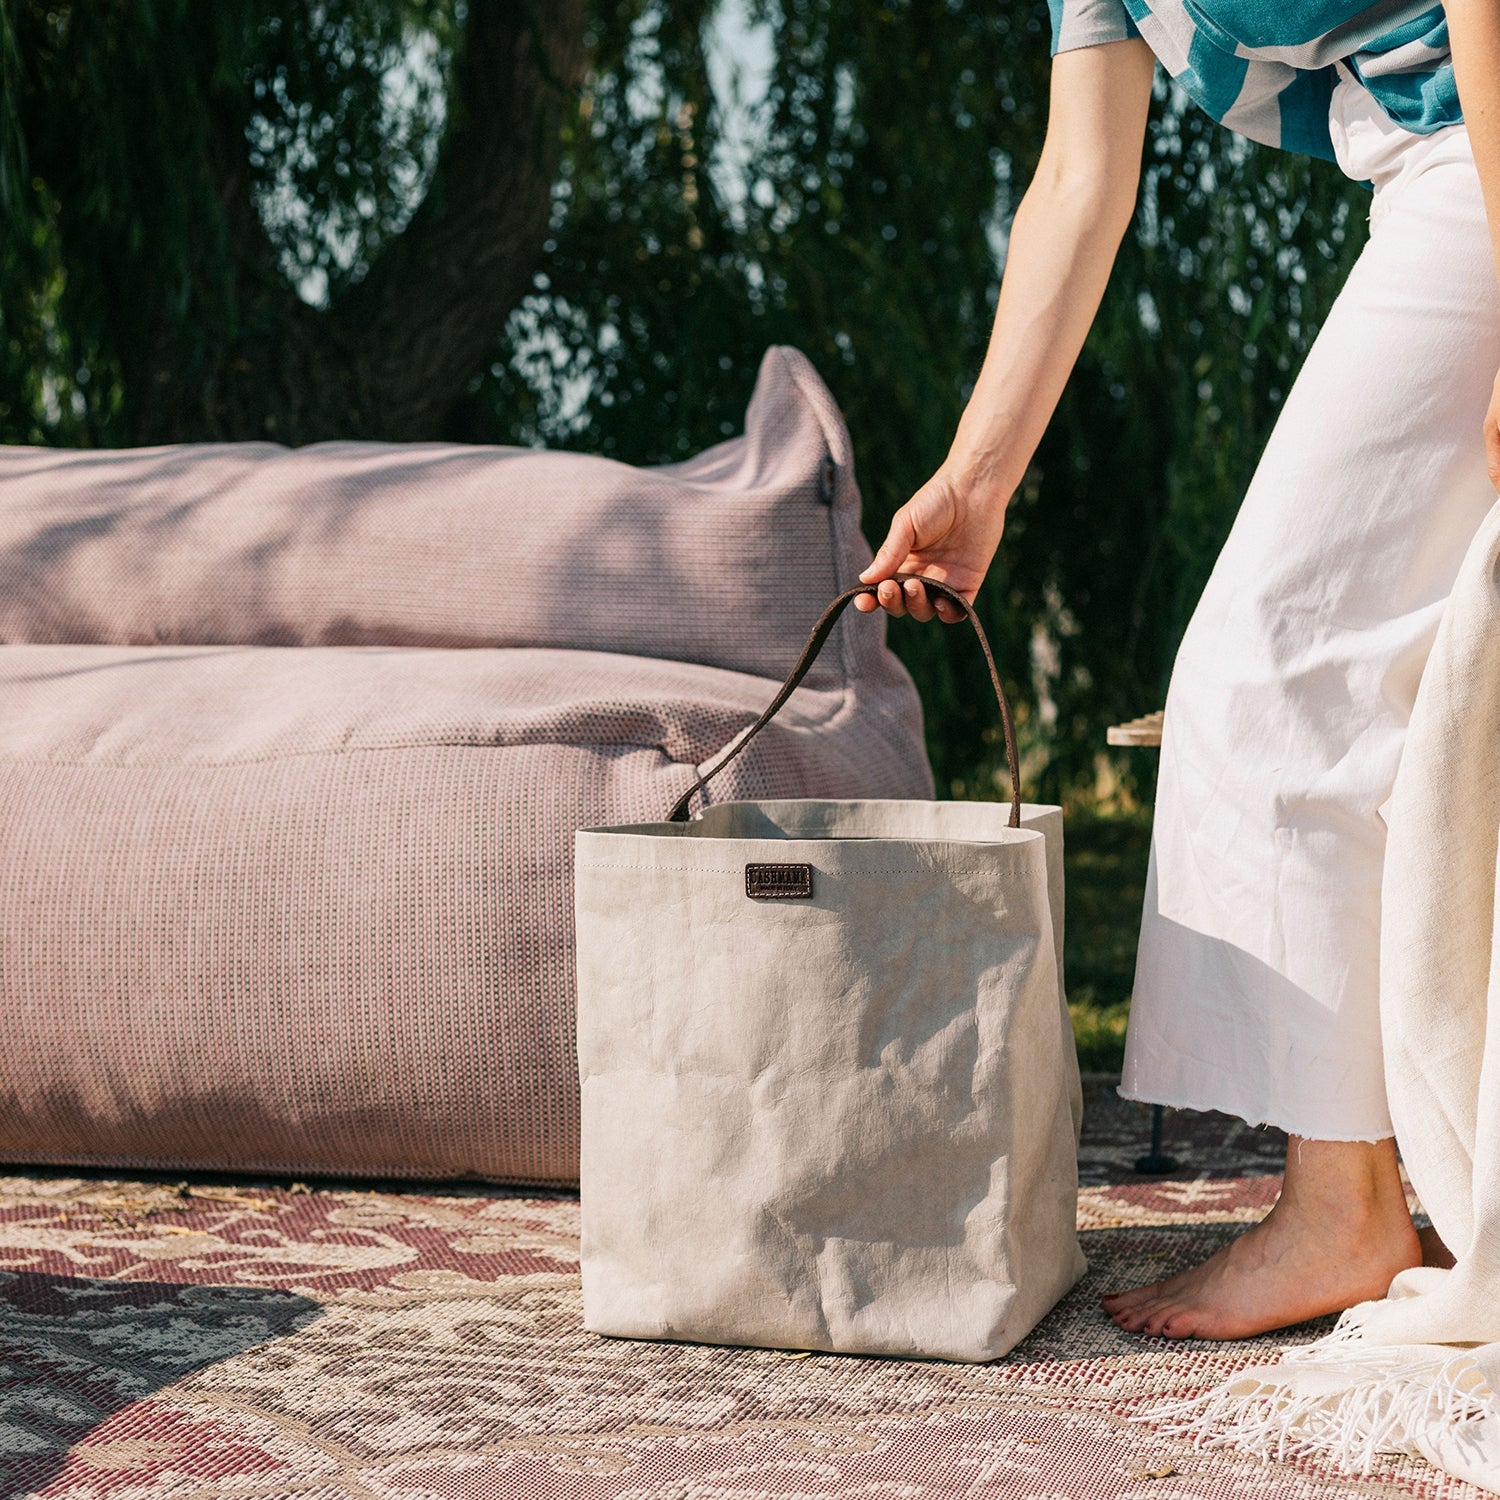 A woman is shown barefoot outdoors next to an outdoor sofa. In her hand rests a grey washable paper handbag with a singular brown strap.